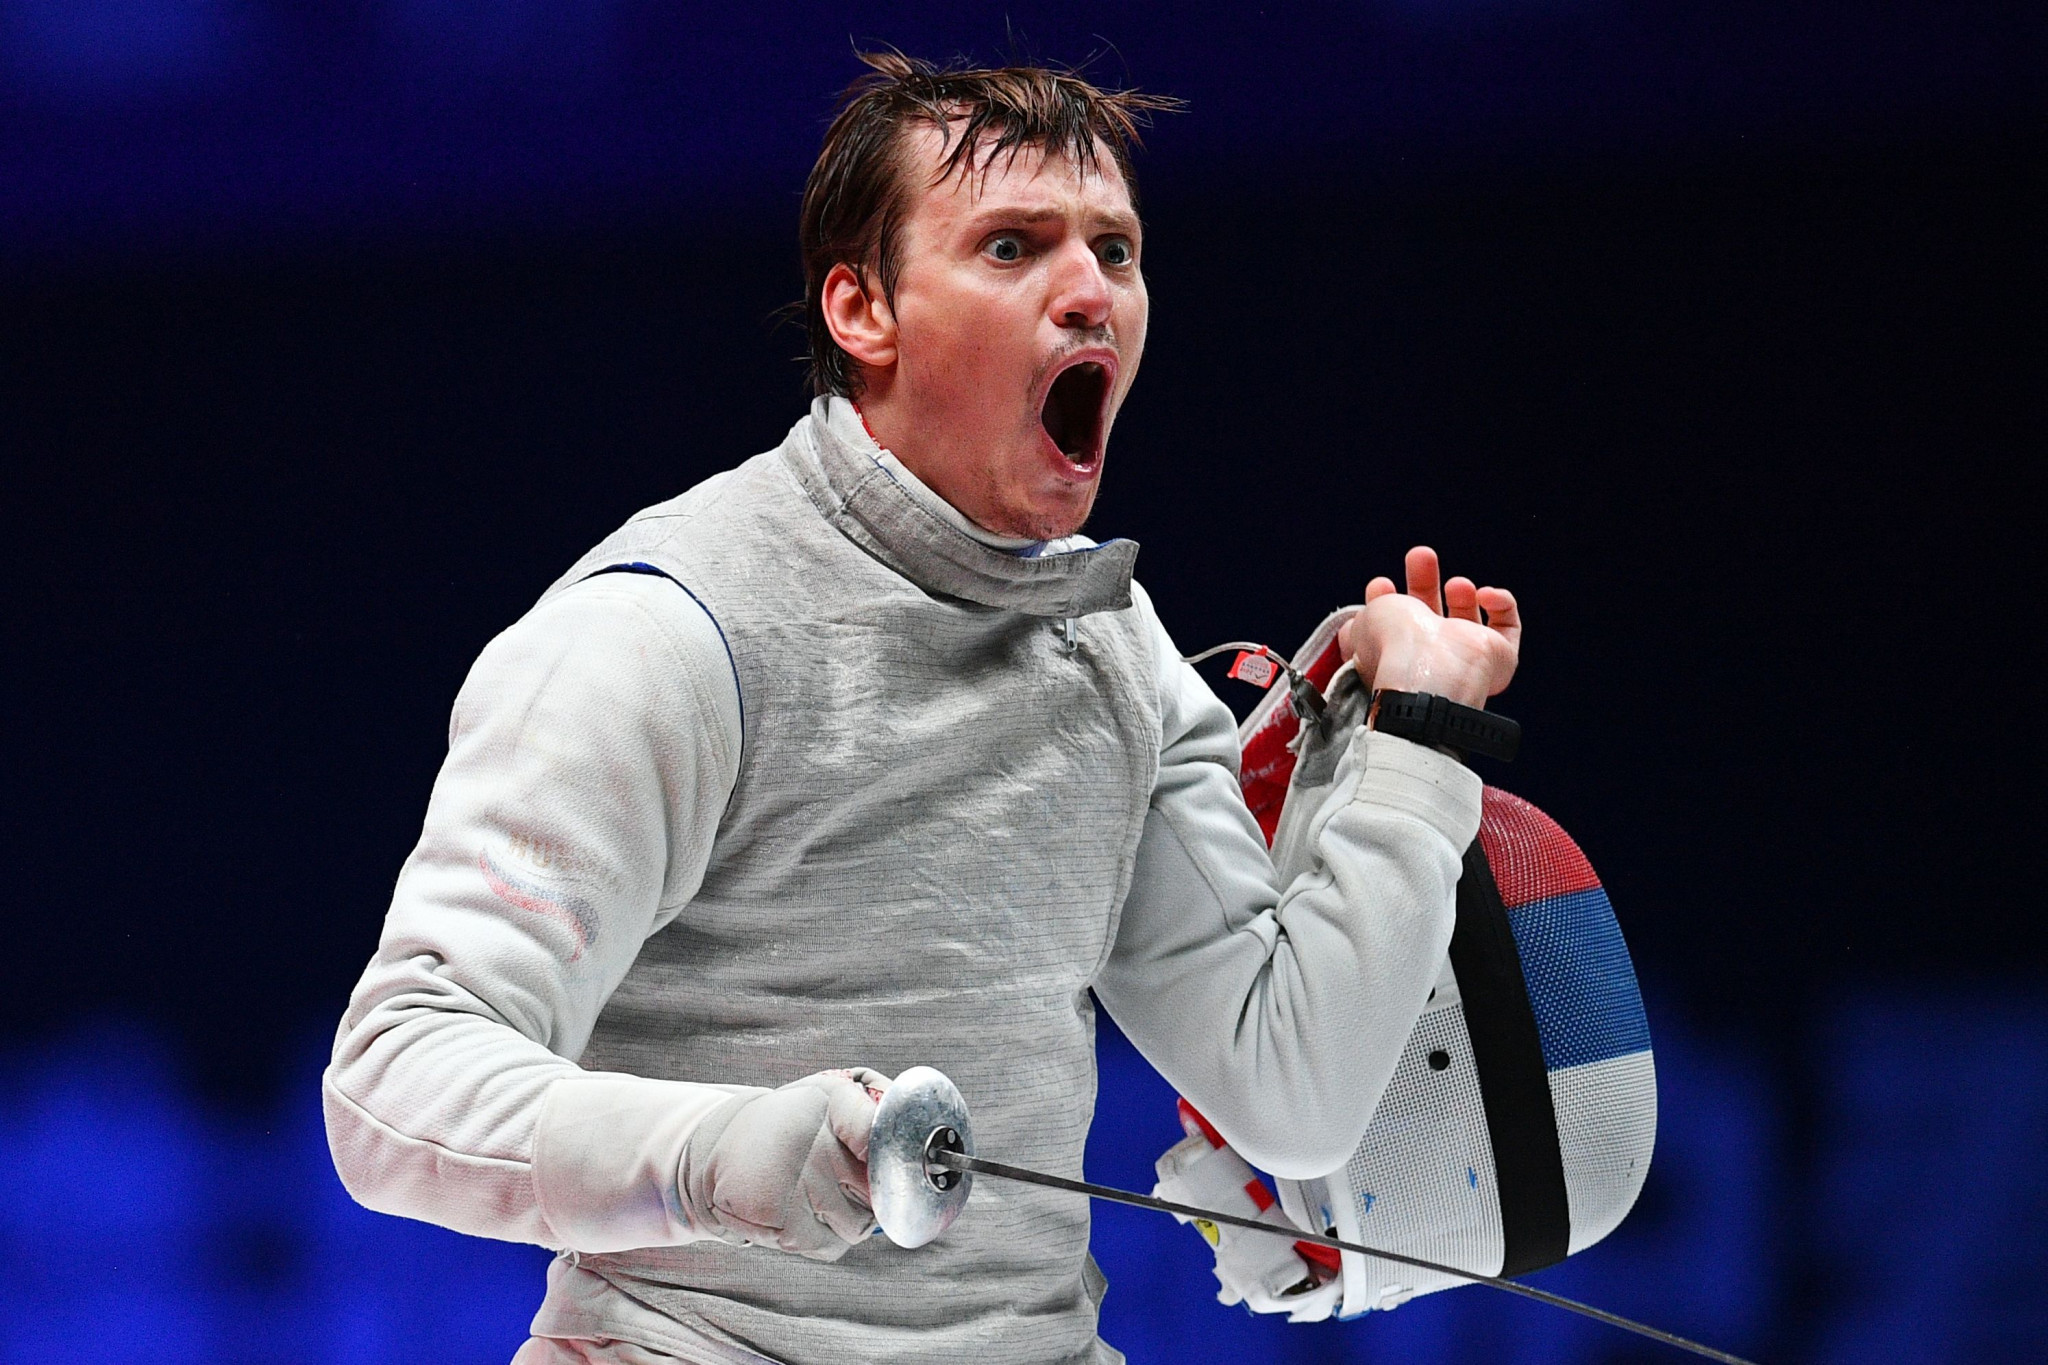 Alexey Cheremisinov helped Russia win the men's team foil title in Paris ©Getty Images